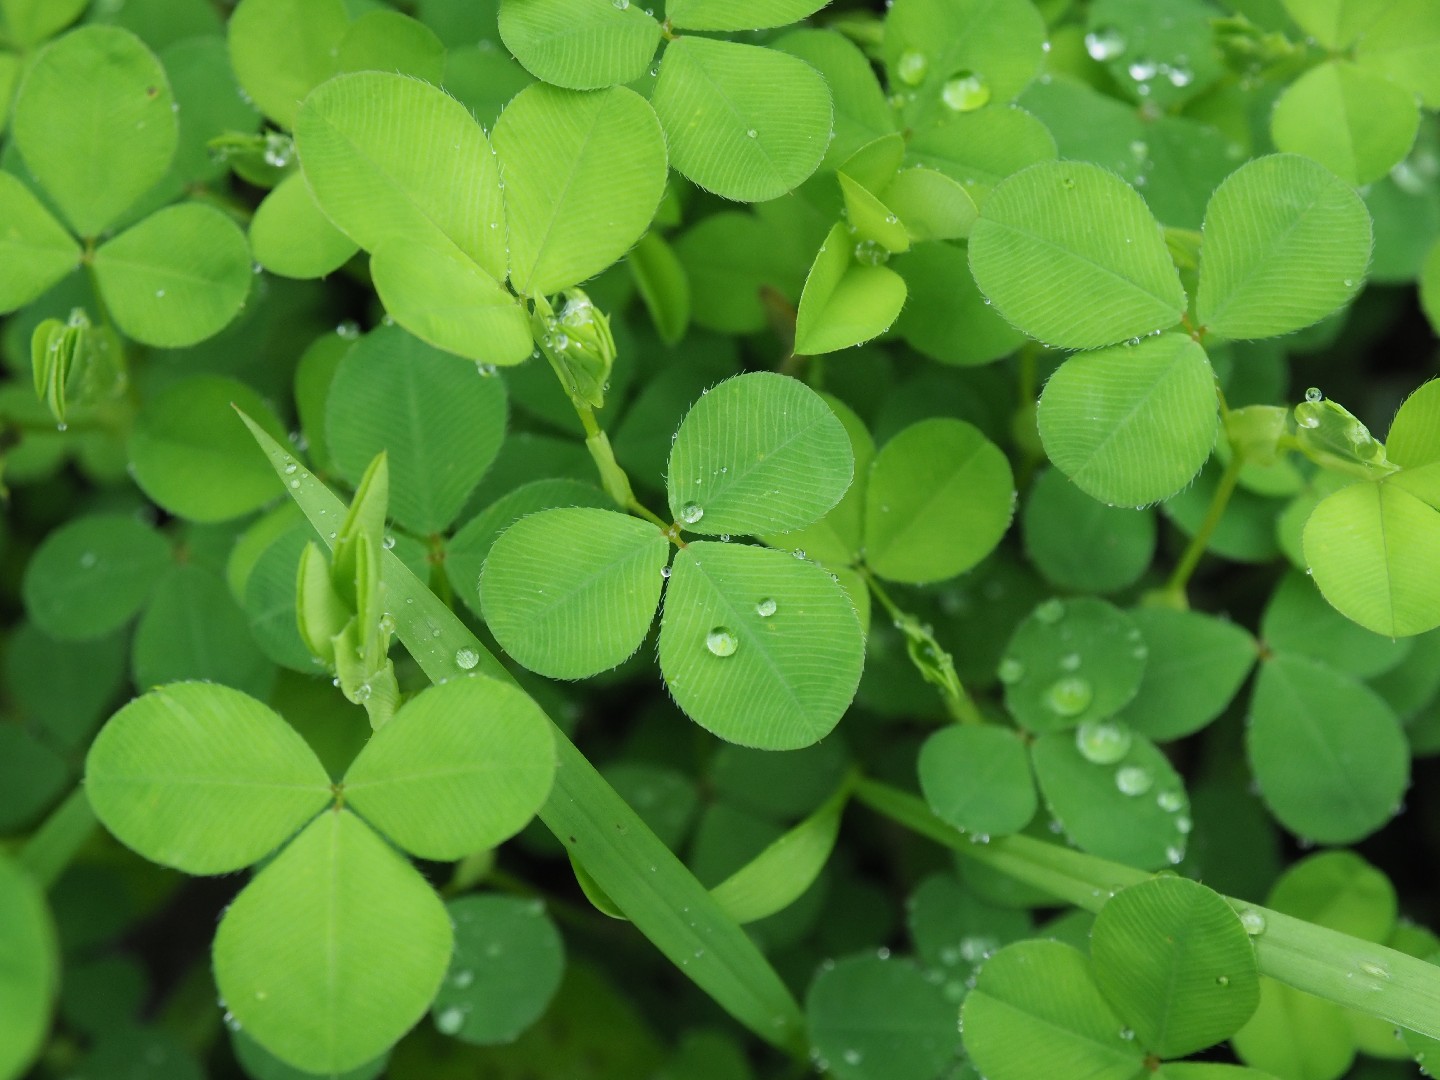 Image of A Japanese clover plant with a single flower and some leaves